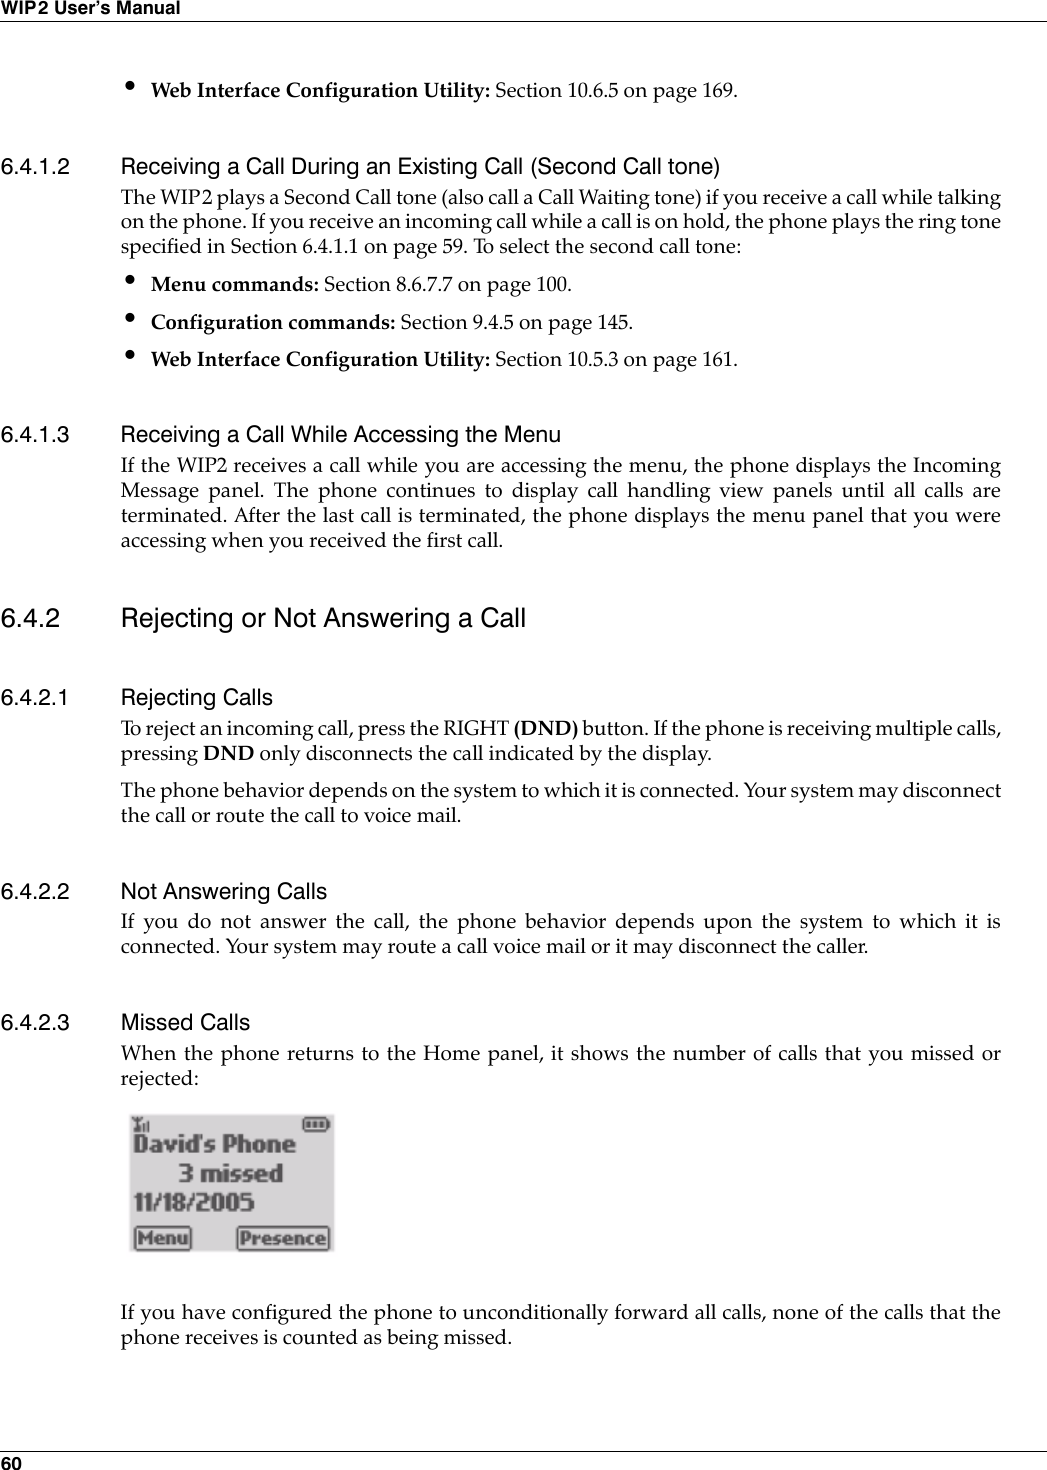 60WIP2 User’s Manual•Web Interface Configuration Utility: Section 10.6.5 on page 169.6.4.1.2 Receiving a Call During an Existing Call (Second Call tone)The WIP2 plays a Second Call tone (also call a Call Waiting tone) if you receive a call while talkingon the phone. If you receive an incoming call while a call is on hold, the phone plays the ring tonespecified in Section 6.4.1.1 on page 59. To select the second call tone:•Menu commands: Section 8.6.7.7 on page 100.•Configuration commands: Section 9.4.5 on page 145.•Web Interface Configuration Utility: Section 10.5.3 on page 161.6.4.1.3 Receiving a Call While Accessing the MenuIf the WIP2 receives a call while you are accessing the menu, the phone displays the IncomingMessage panel. The phone continues to display call handling view panels until all calls areterminated. After the last call is terminated, the phone displays the menu panel that you wereaccessing when you received the first call.6.4.2 Rejecting or Not Answering a Call6.4.2.1 Rejecting CallsTo reject an incoming call, press the RIGHT (DND) button. If the phone is receiving multiple calls,pressing DND only disconnects the call indicated by the display.The phone behavior depends on the system to which it is connected. Your system may disconnectthe call or route the call to voice mail.6.4.2.2 Not Answering CallsIf you do not answer the call, the phone behavior depends upon the system to which it isconnected. Your system may route a call voice mail or it may disconnect the caller.6.4.2.3 Missed CallsWhen the phone returns to the Home panel, it shows the number of calls that you missed orrejected:If you have configured the phone to unconditionally forward all calls, none of the calls that thephone receives is counted as being missed.